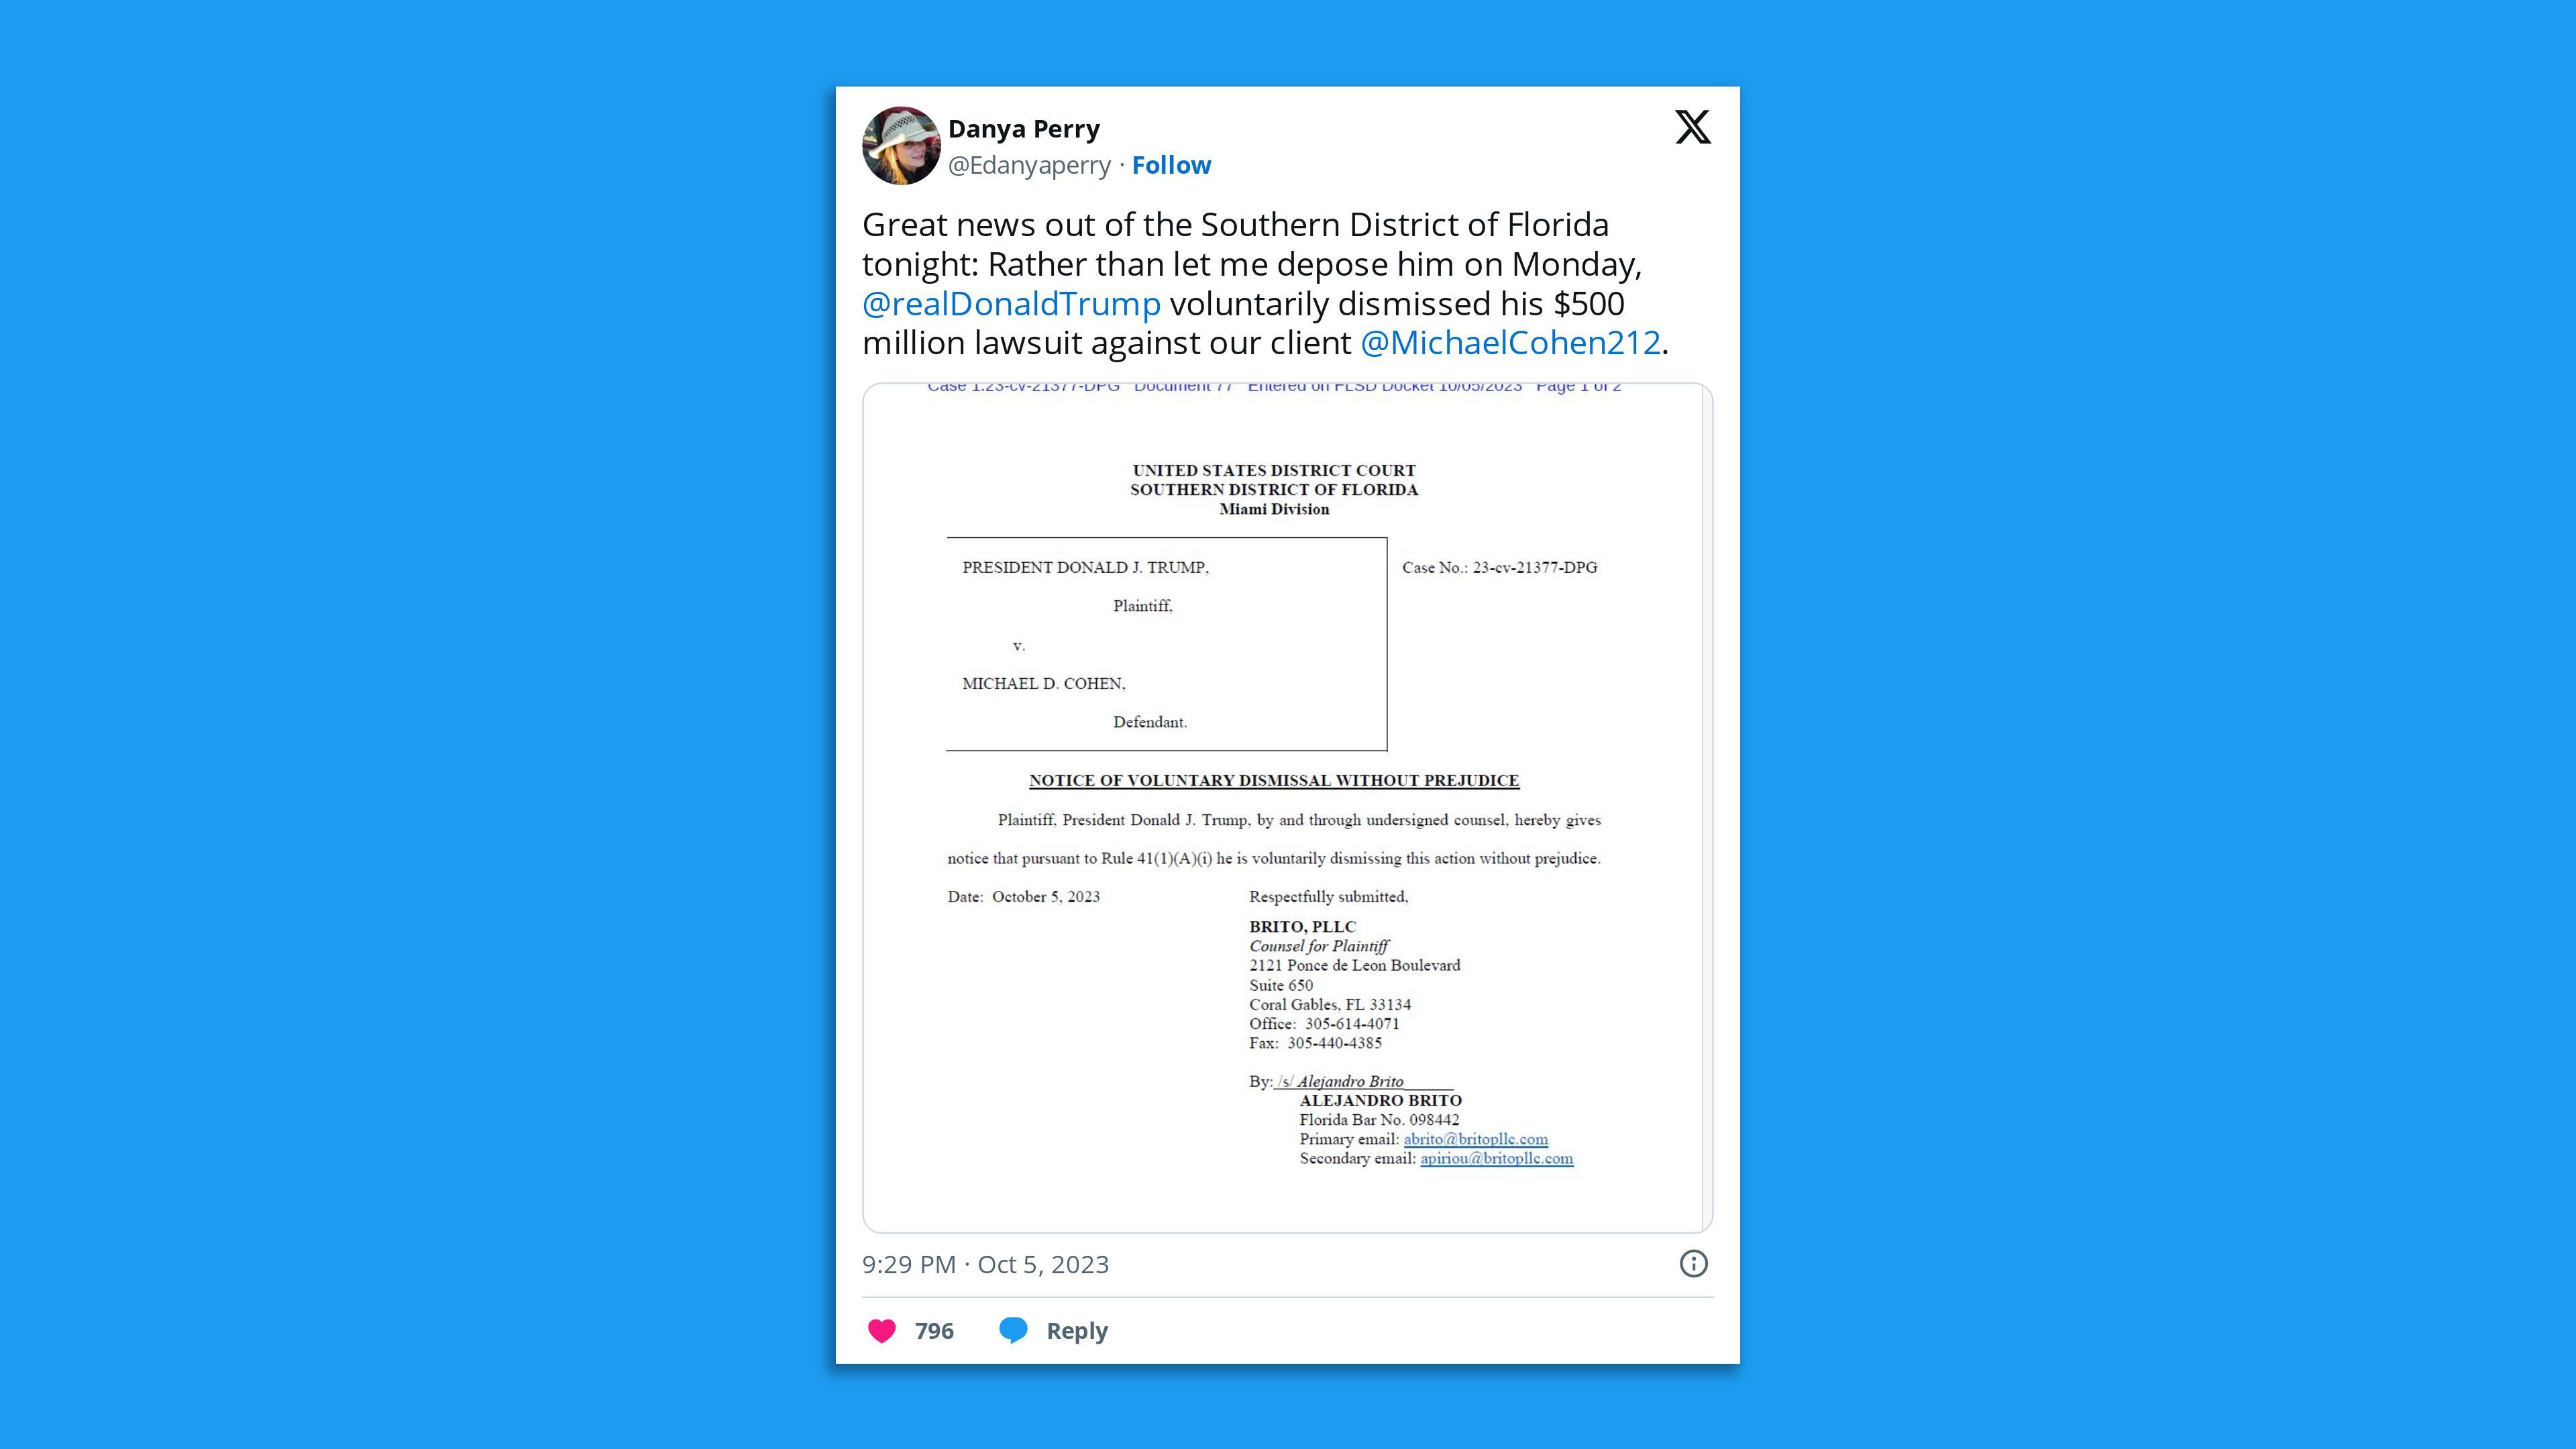 A screenshot of a tweet by Danya Perry, Michael Cohen's attorney, saying: "Great news out of the Southern District of Florida tonight: Rather than let me depose him on Monday,  @realDonaldTrump  voluntarily dismissed his $500 million lawsuit against our client  @MichaelCohen212 ."